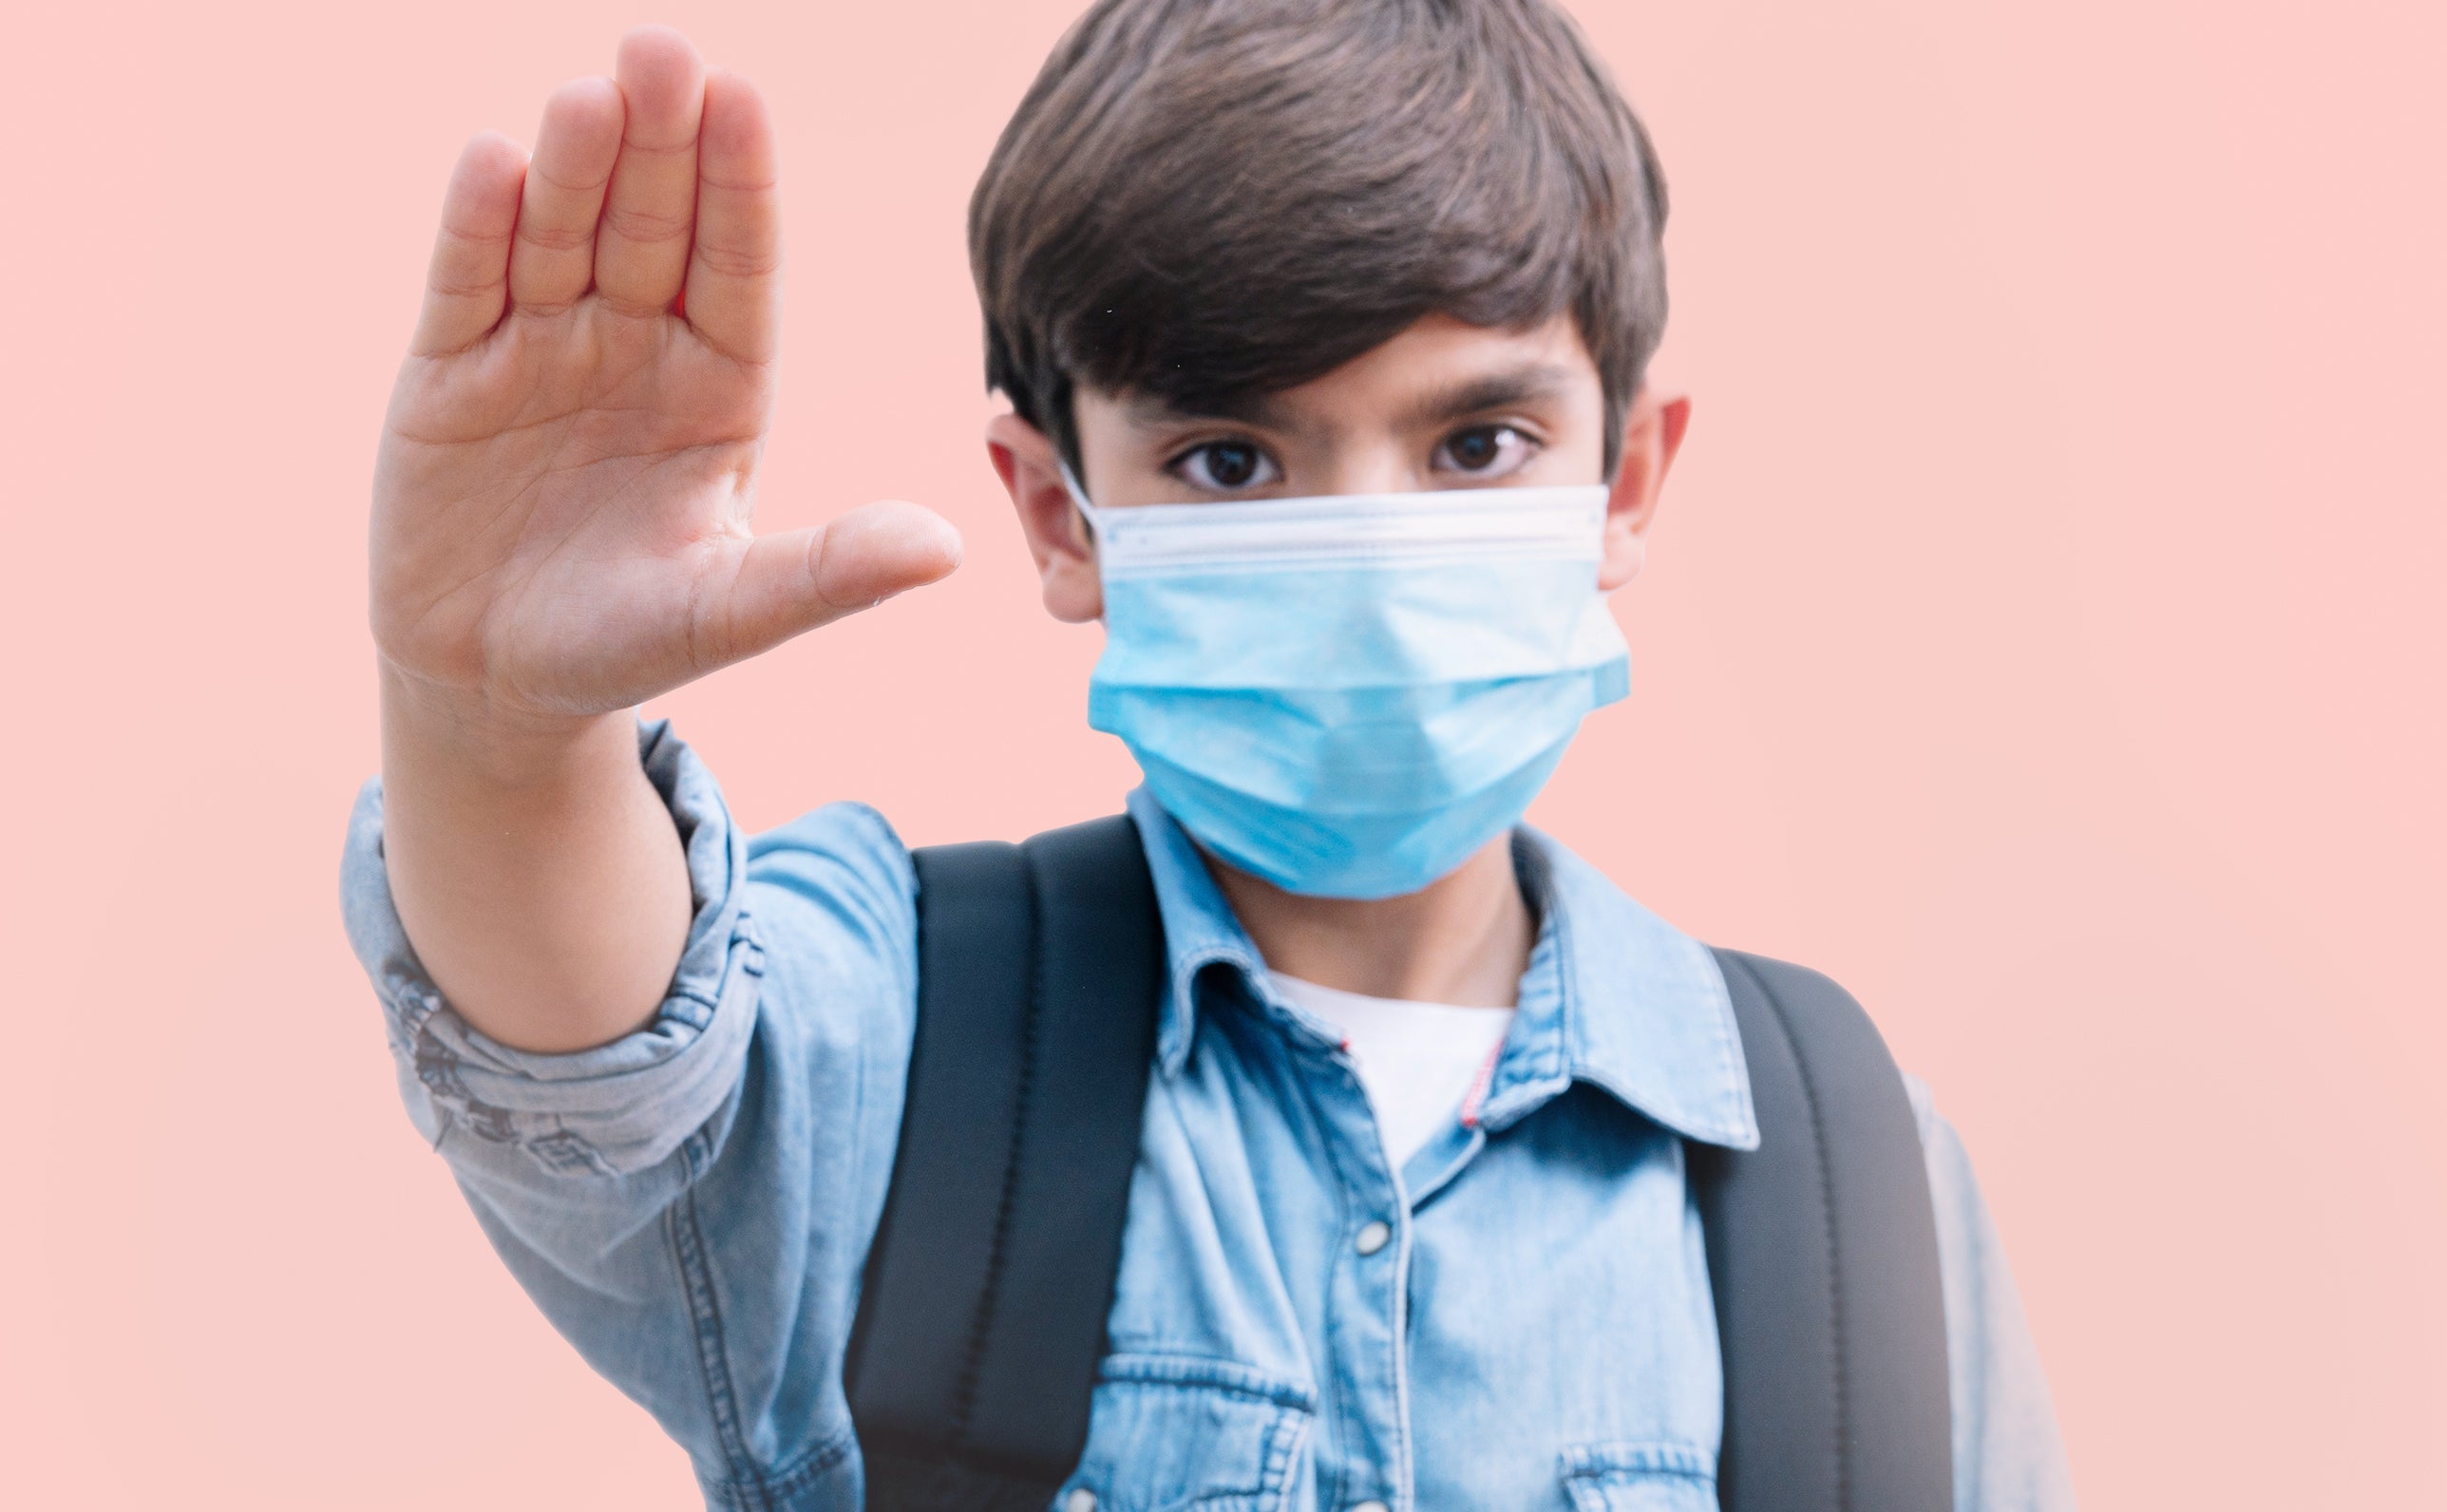 What is a Hand Sanitizer? How to Stay Away From Viruses While at School?